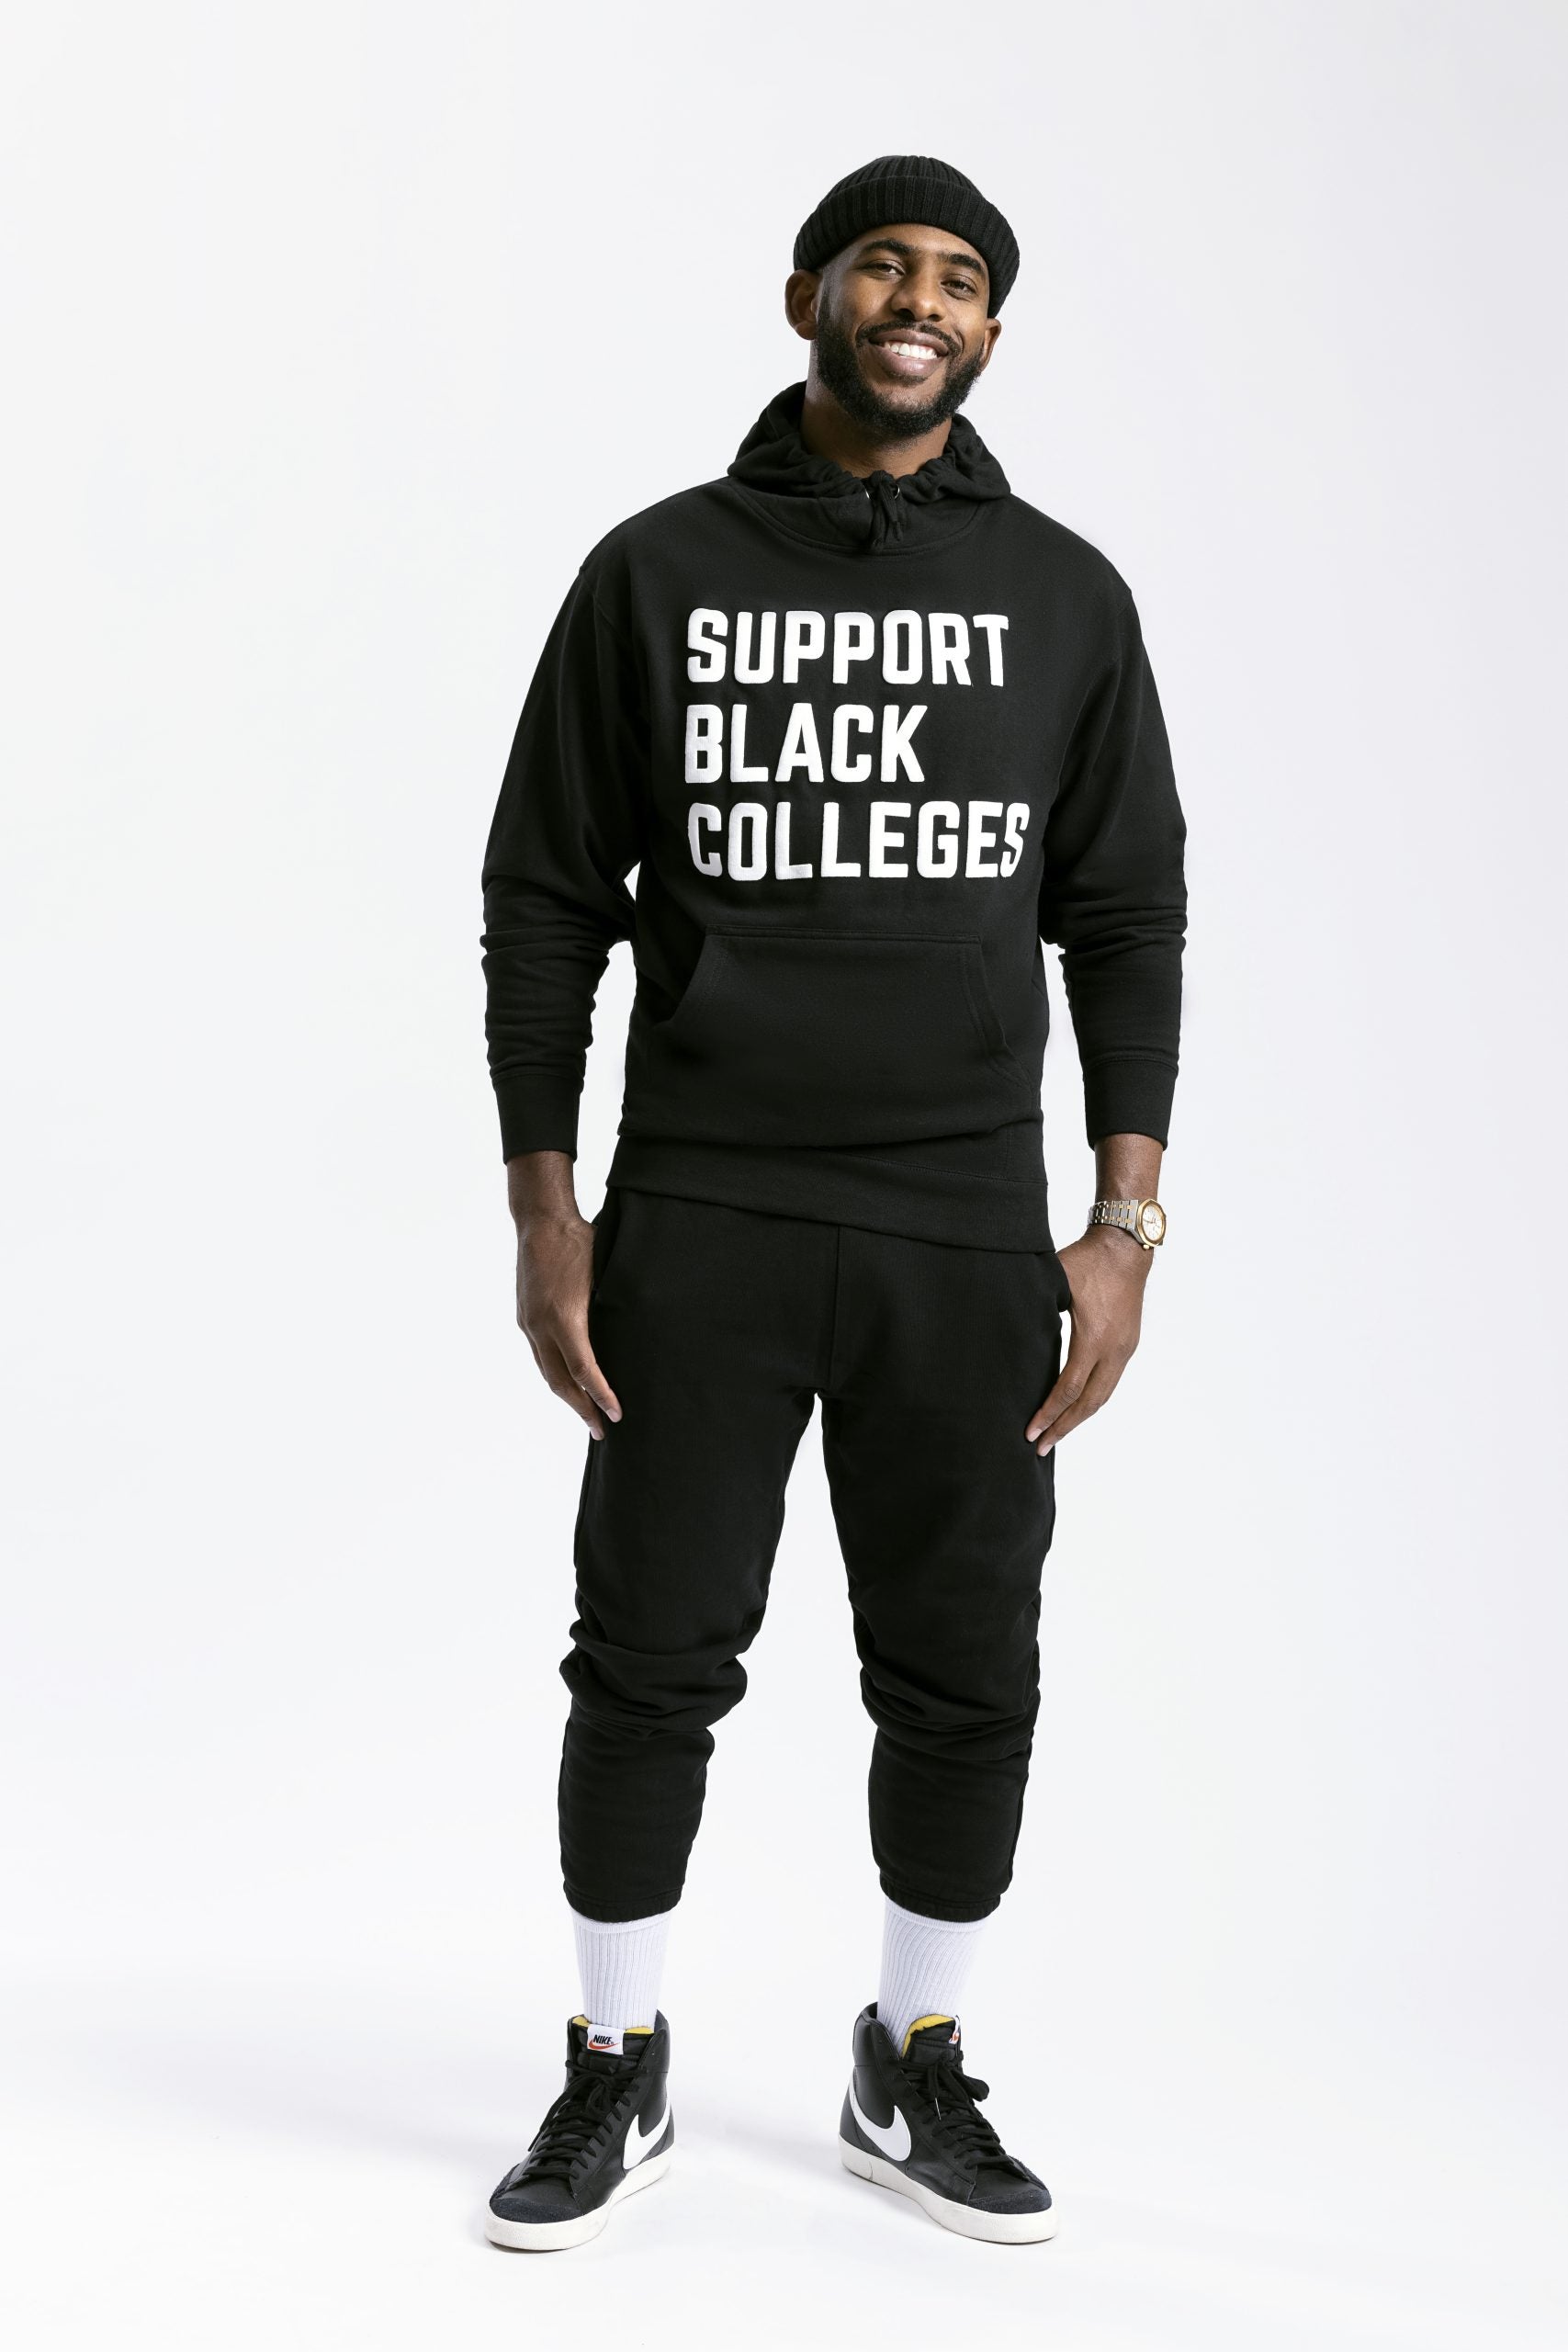 Exclusive: Chris Paul's Social Change Fund And Bleacher Report Partner On Capsule Collection Supporting HBCUs